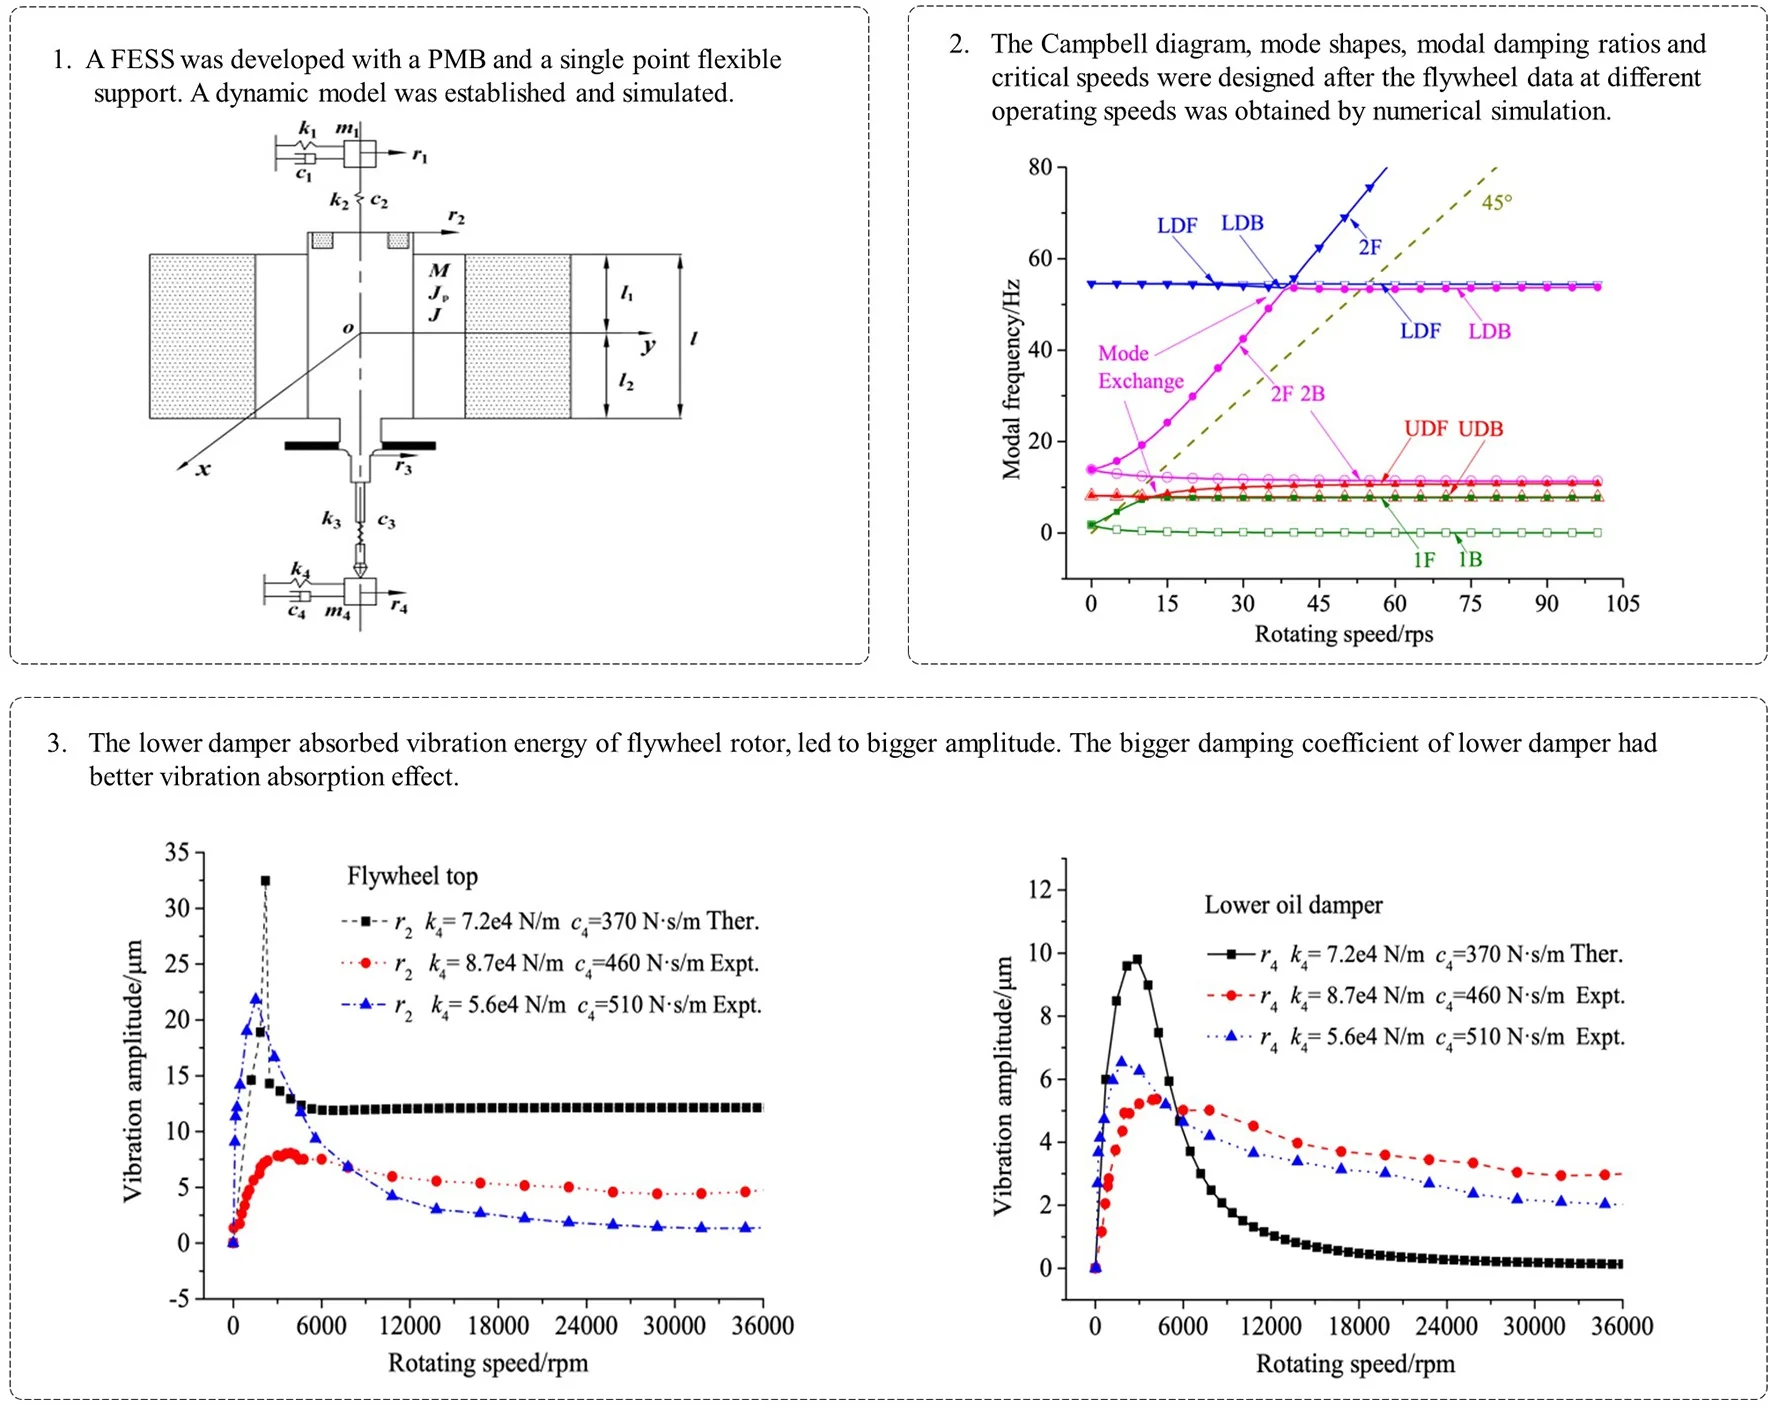 Dynamics research of a flywheel shafting with PMB and a single point flexible support